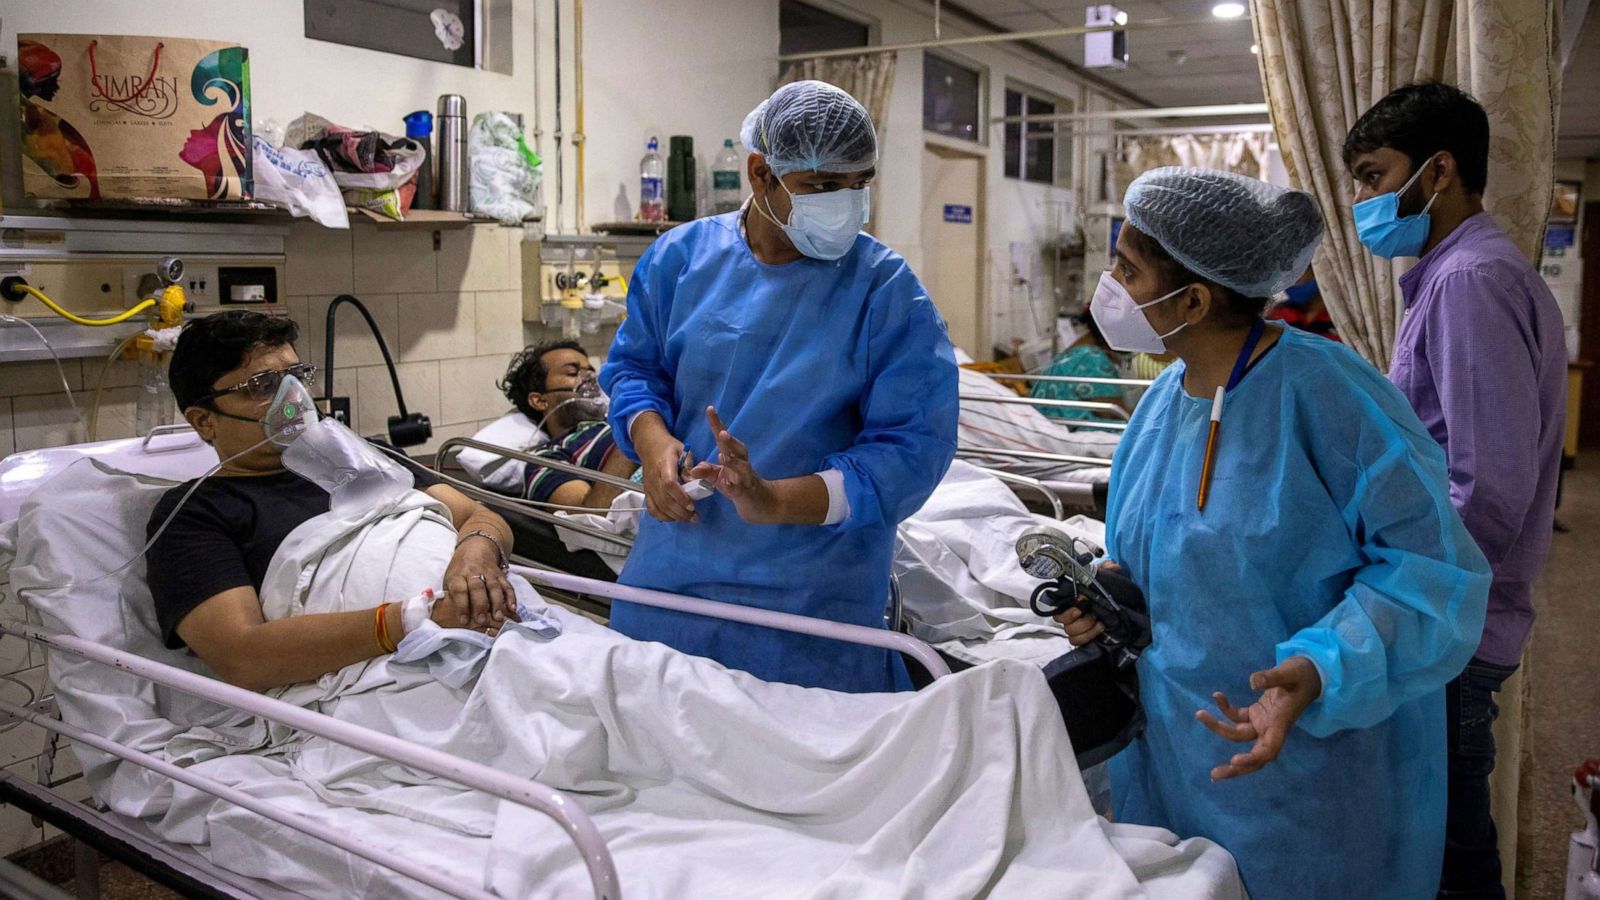 In hospitals during India's COVID-19 crisis, doctors must choose 'who to be saved' - ABC News